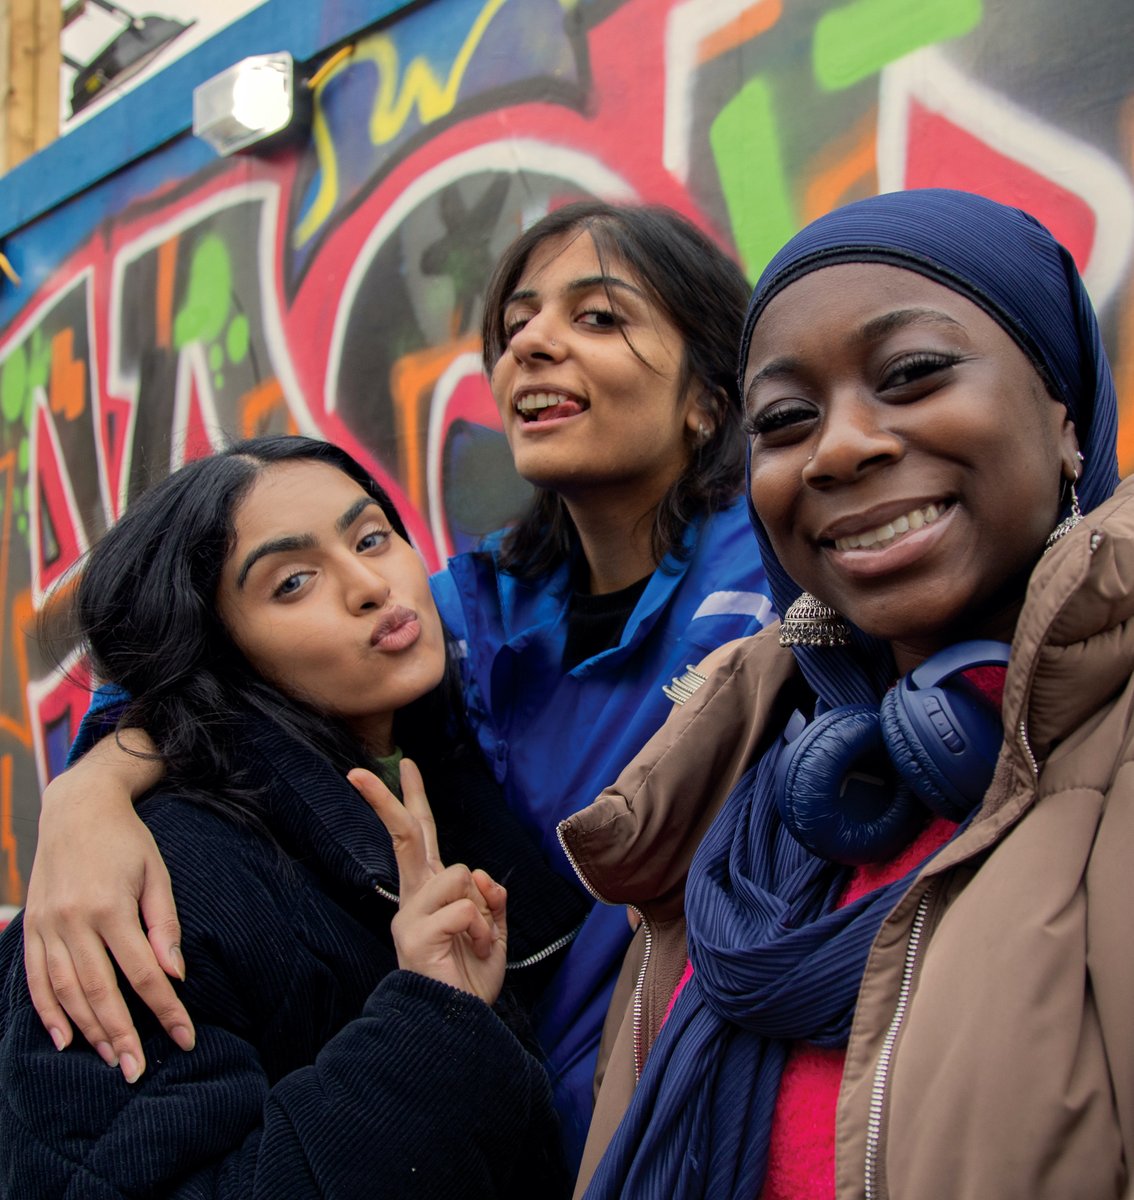 ICYMI – We’ve just booked our tickets to go and see Liberation Squares at the North Wall,a riotous, funny play, inspired by graphic novels, hip hop, pop culture and real-world activists. thenorthwall.com/whats-on/liber…